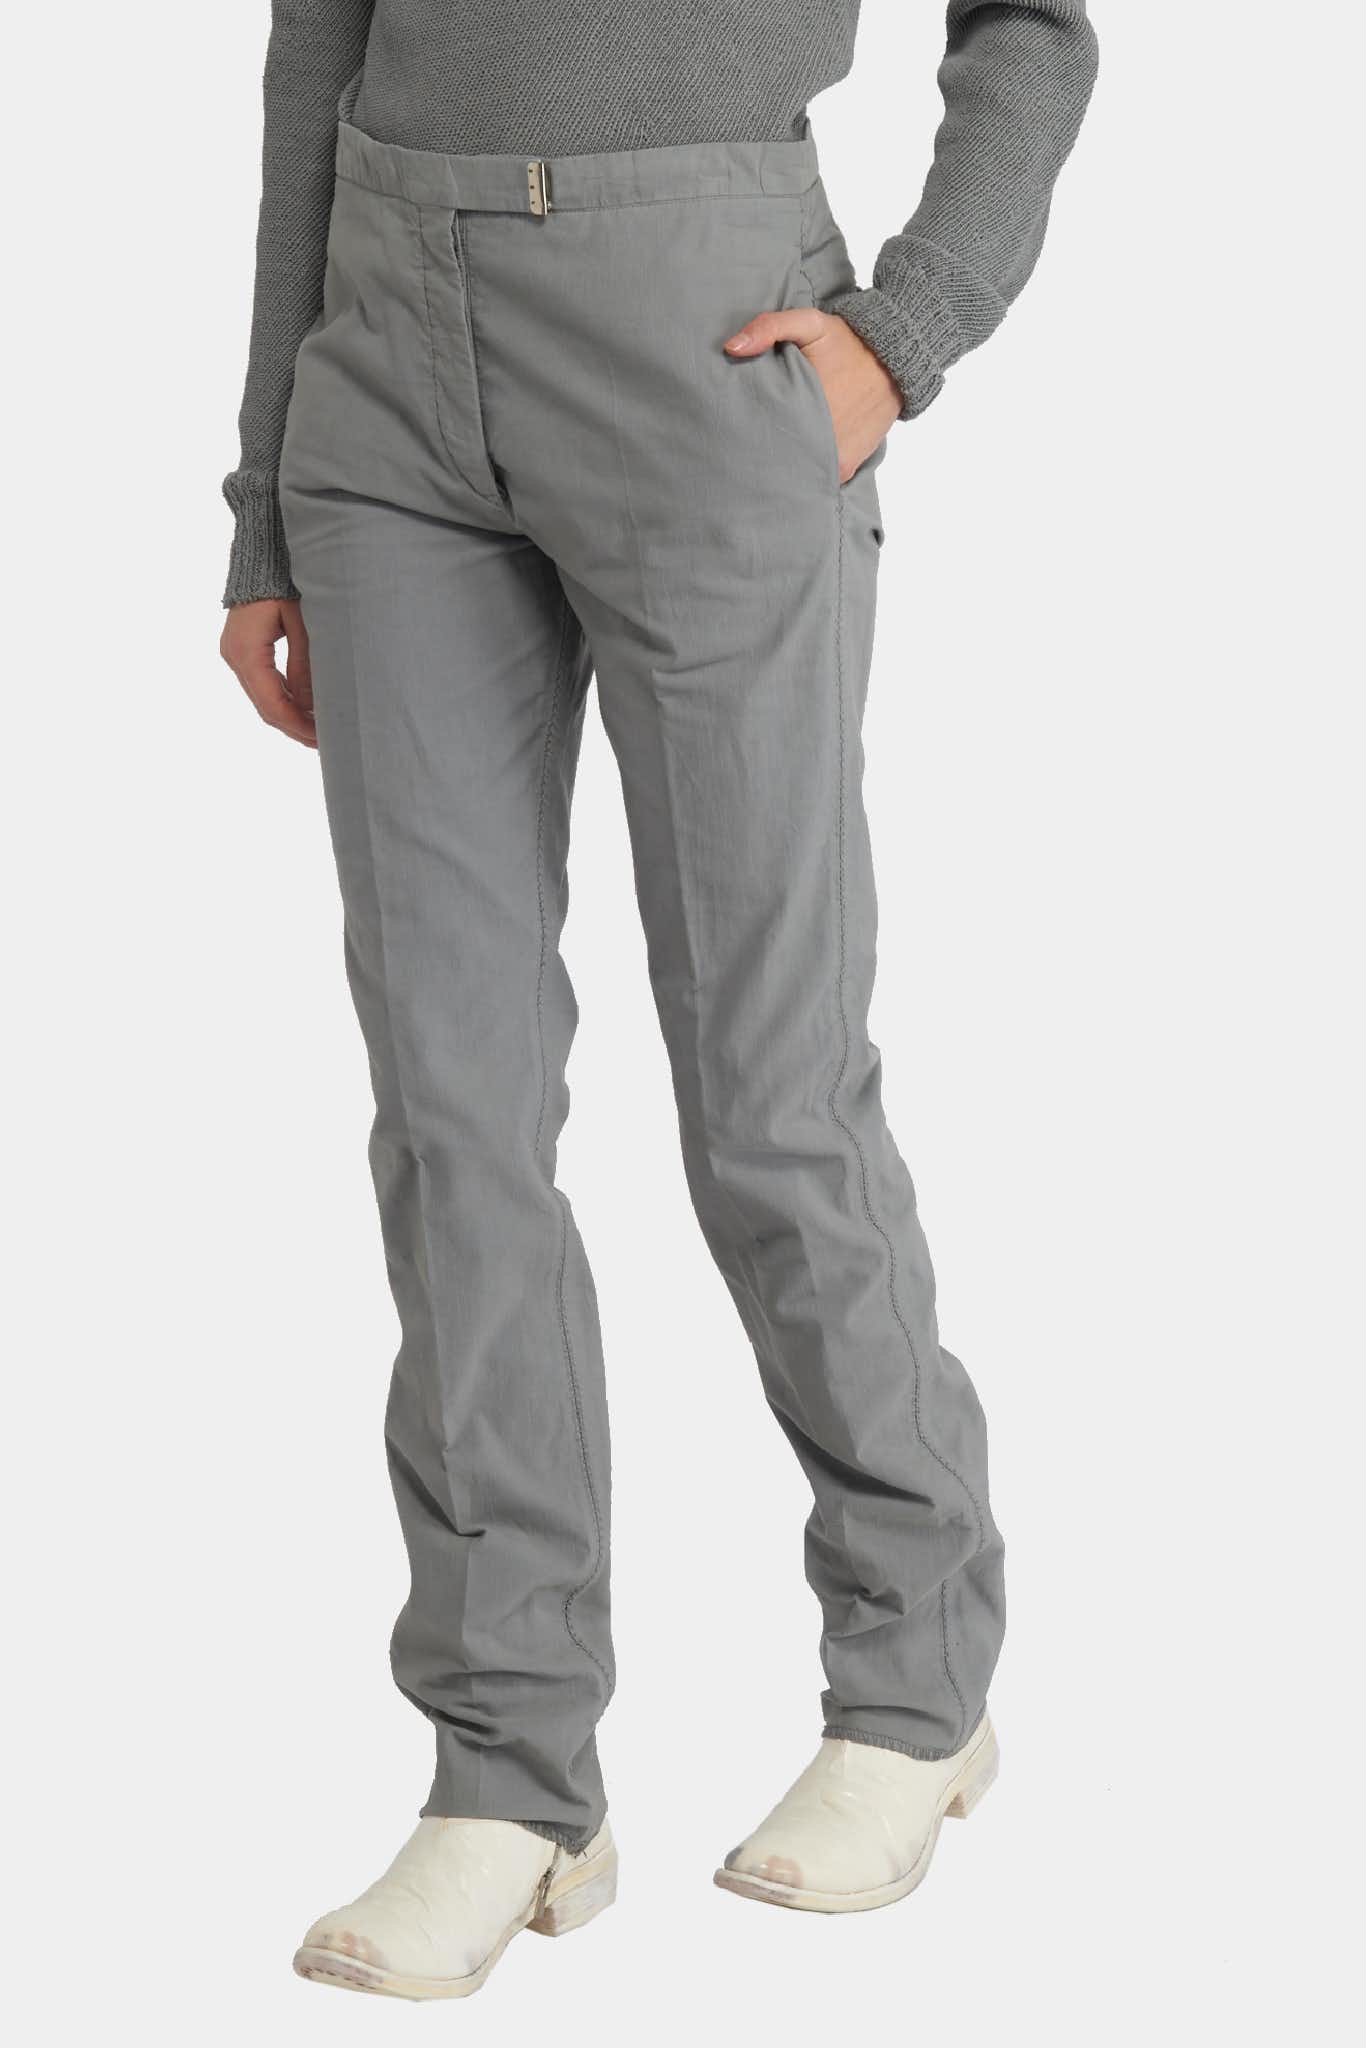 Carol Christian Poell Right pants stitch in taupe cotton – LECLAIREUR